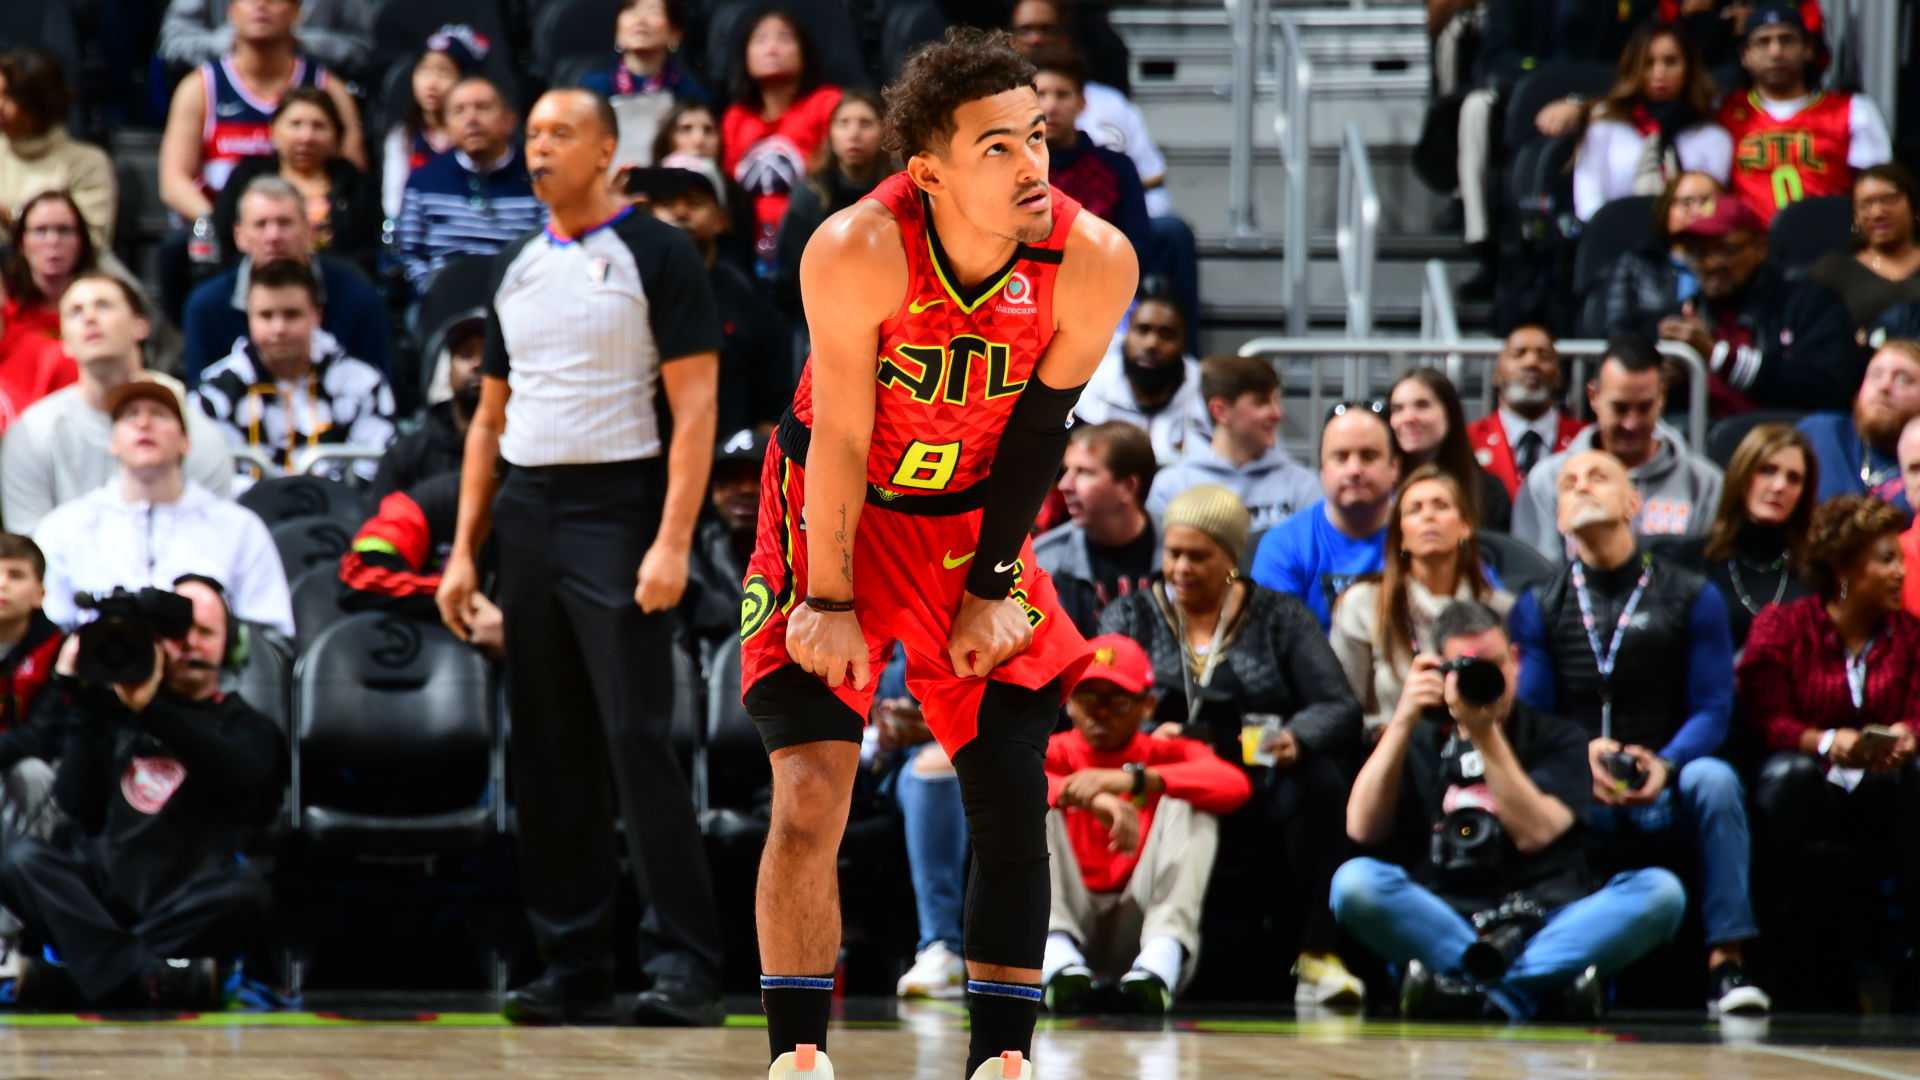 Trae Young Wallpaper HD 1